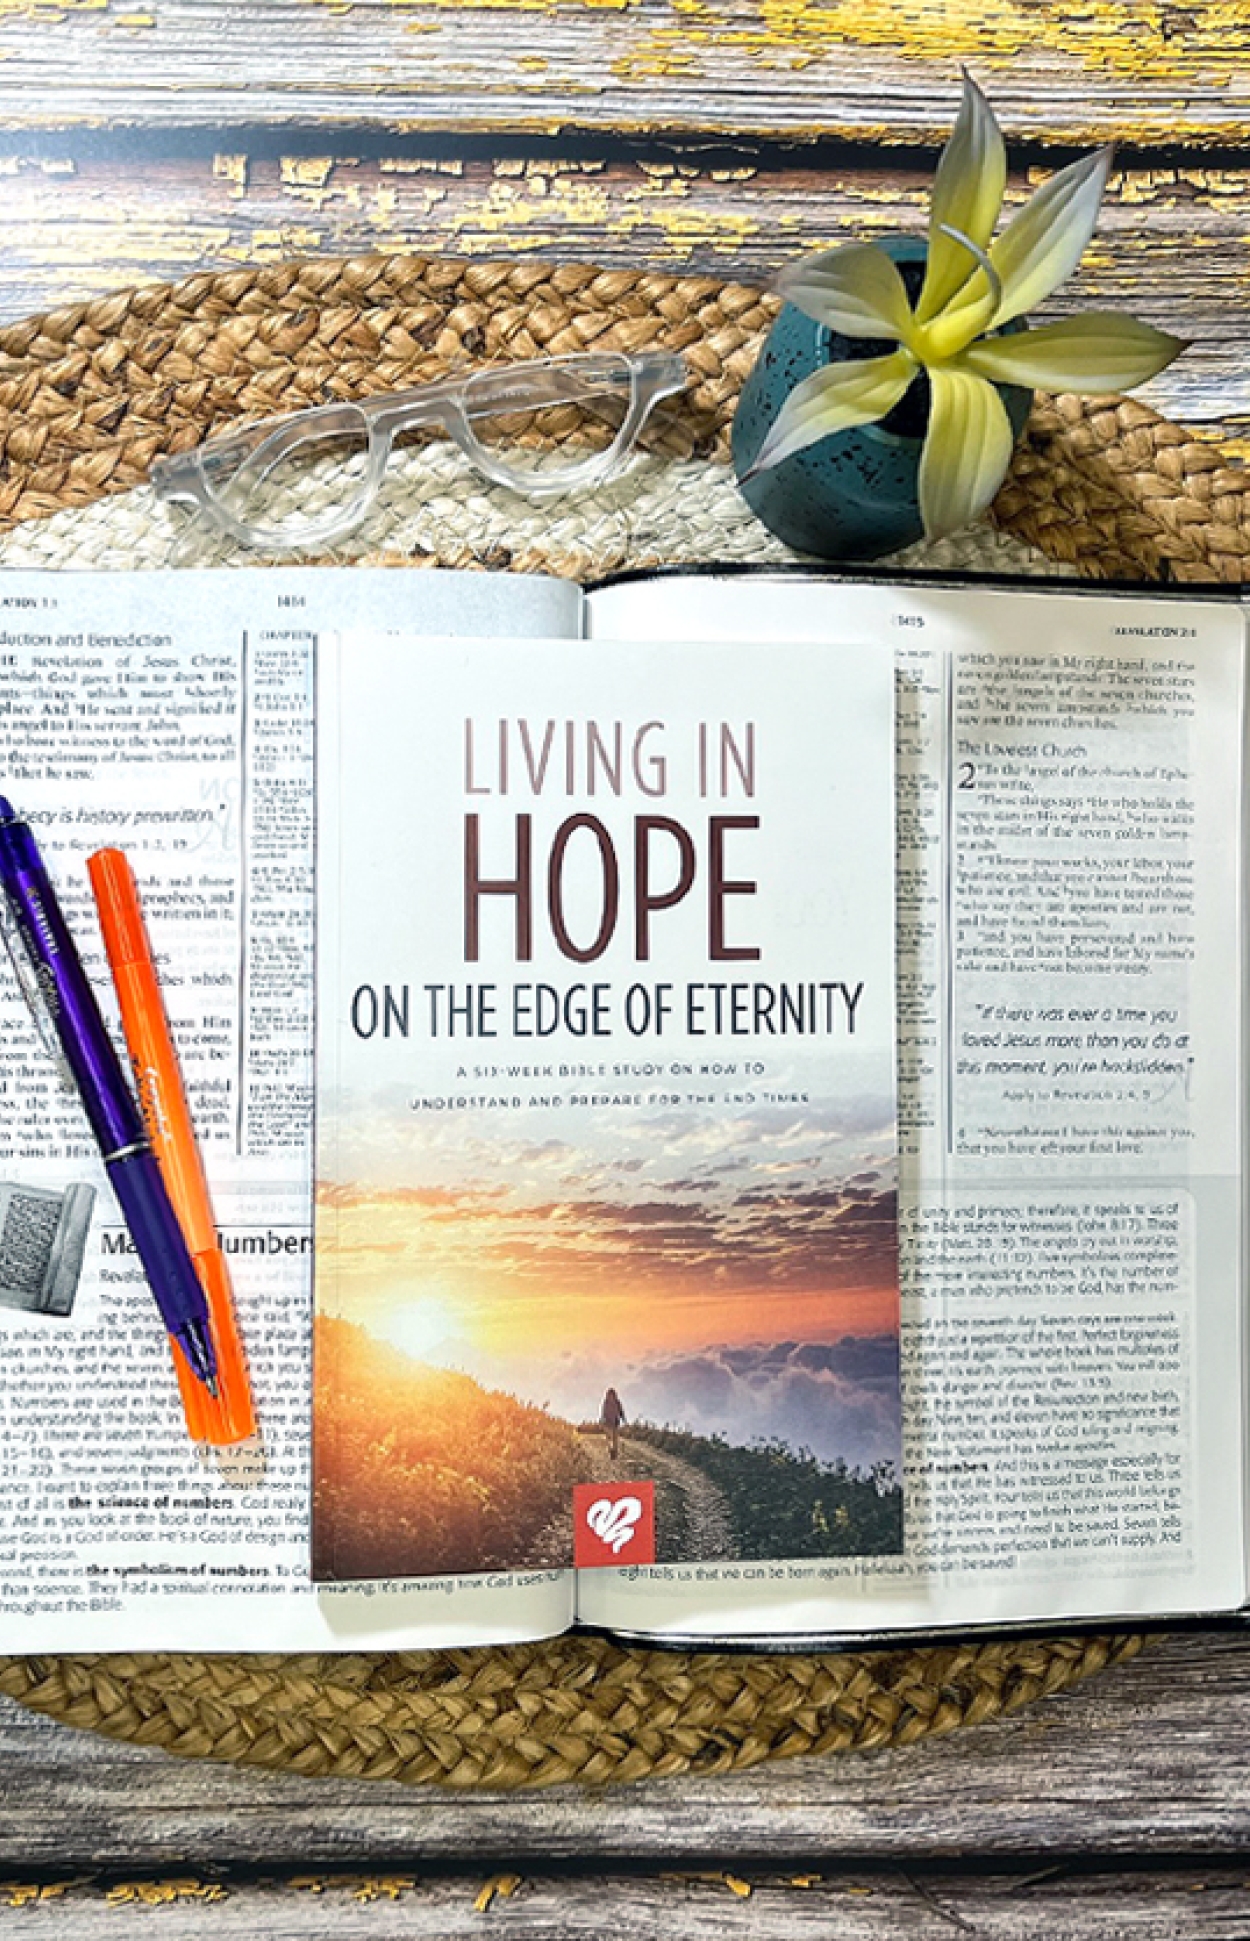 Bss157 living in hope on the edge of eternity bible study FLAT LAY